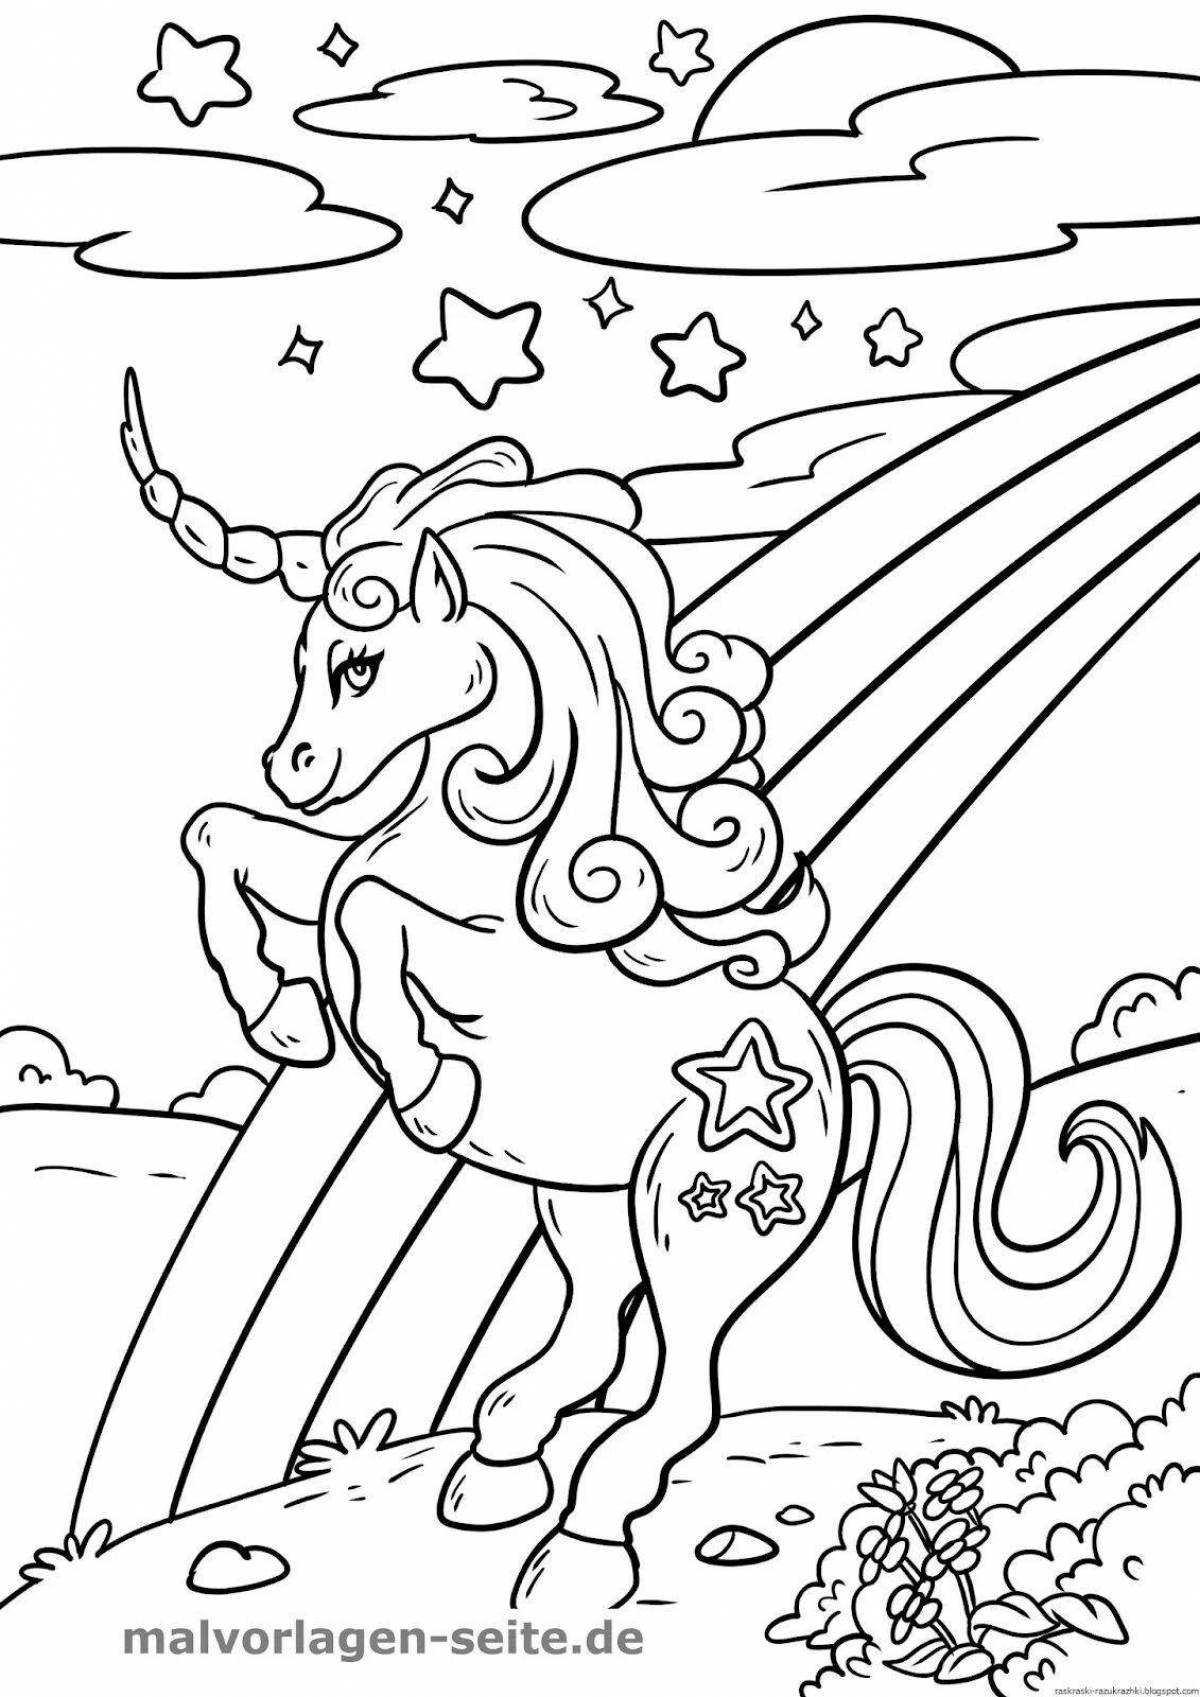 Glitter coloring book for girls 6 years old unicorn